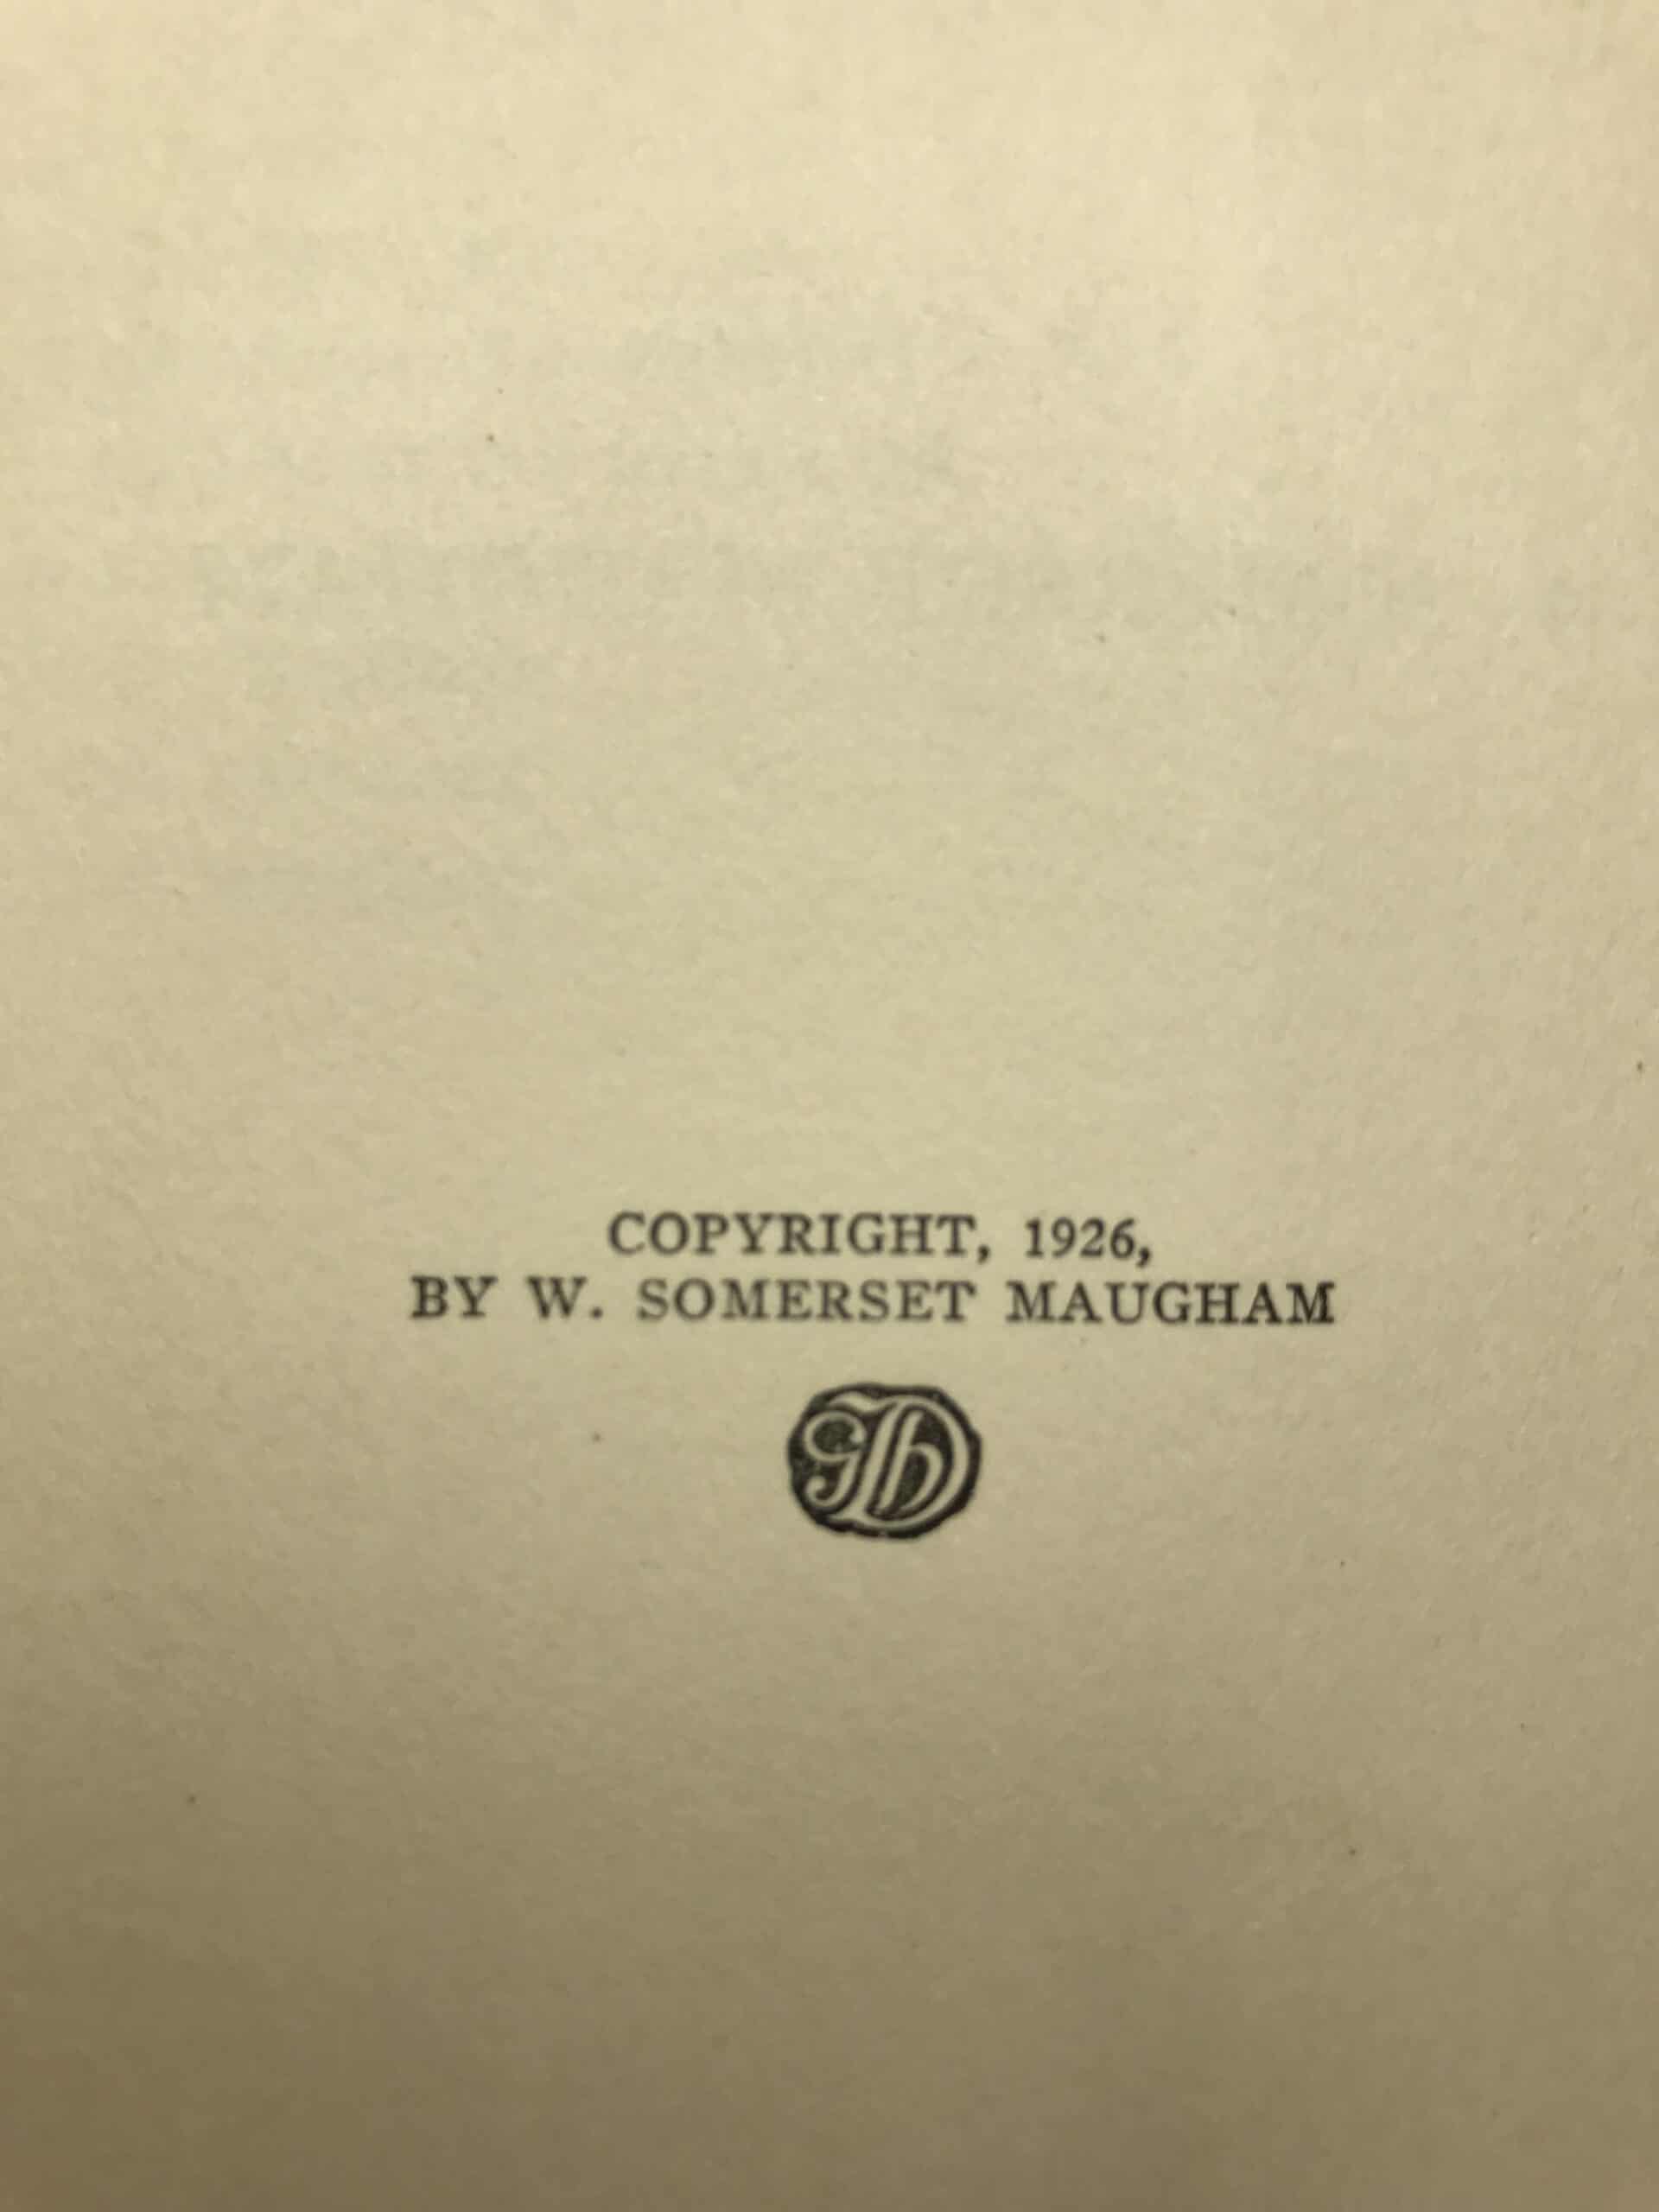 w somerset maugham casuarina tree first edition2